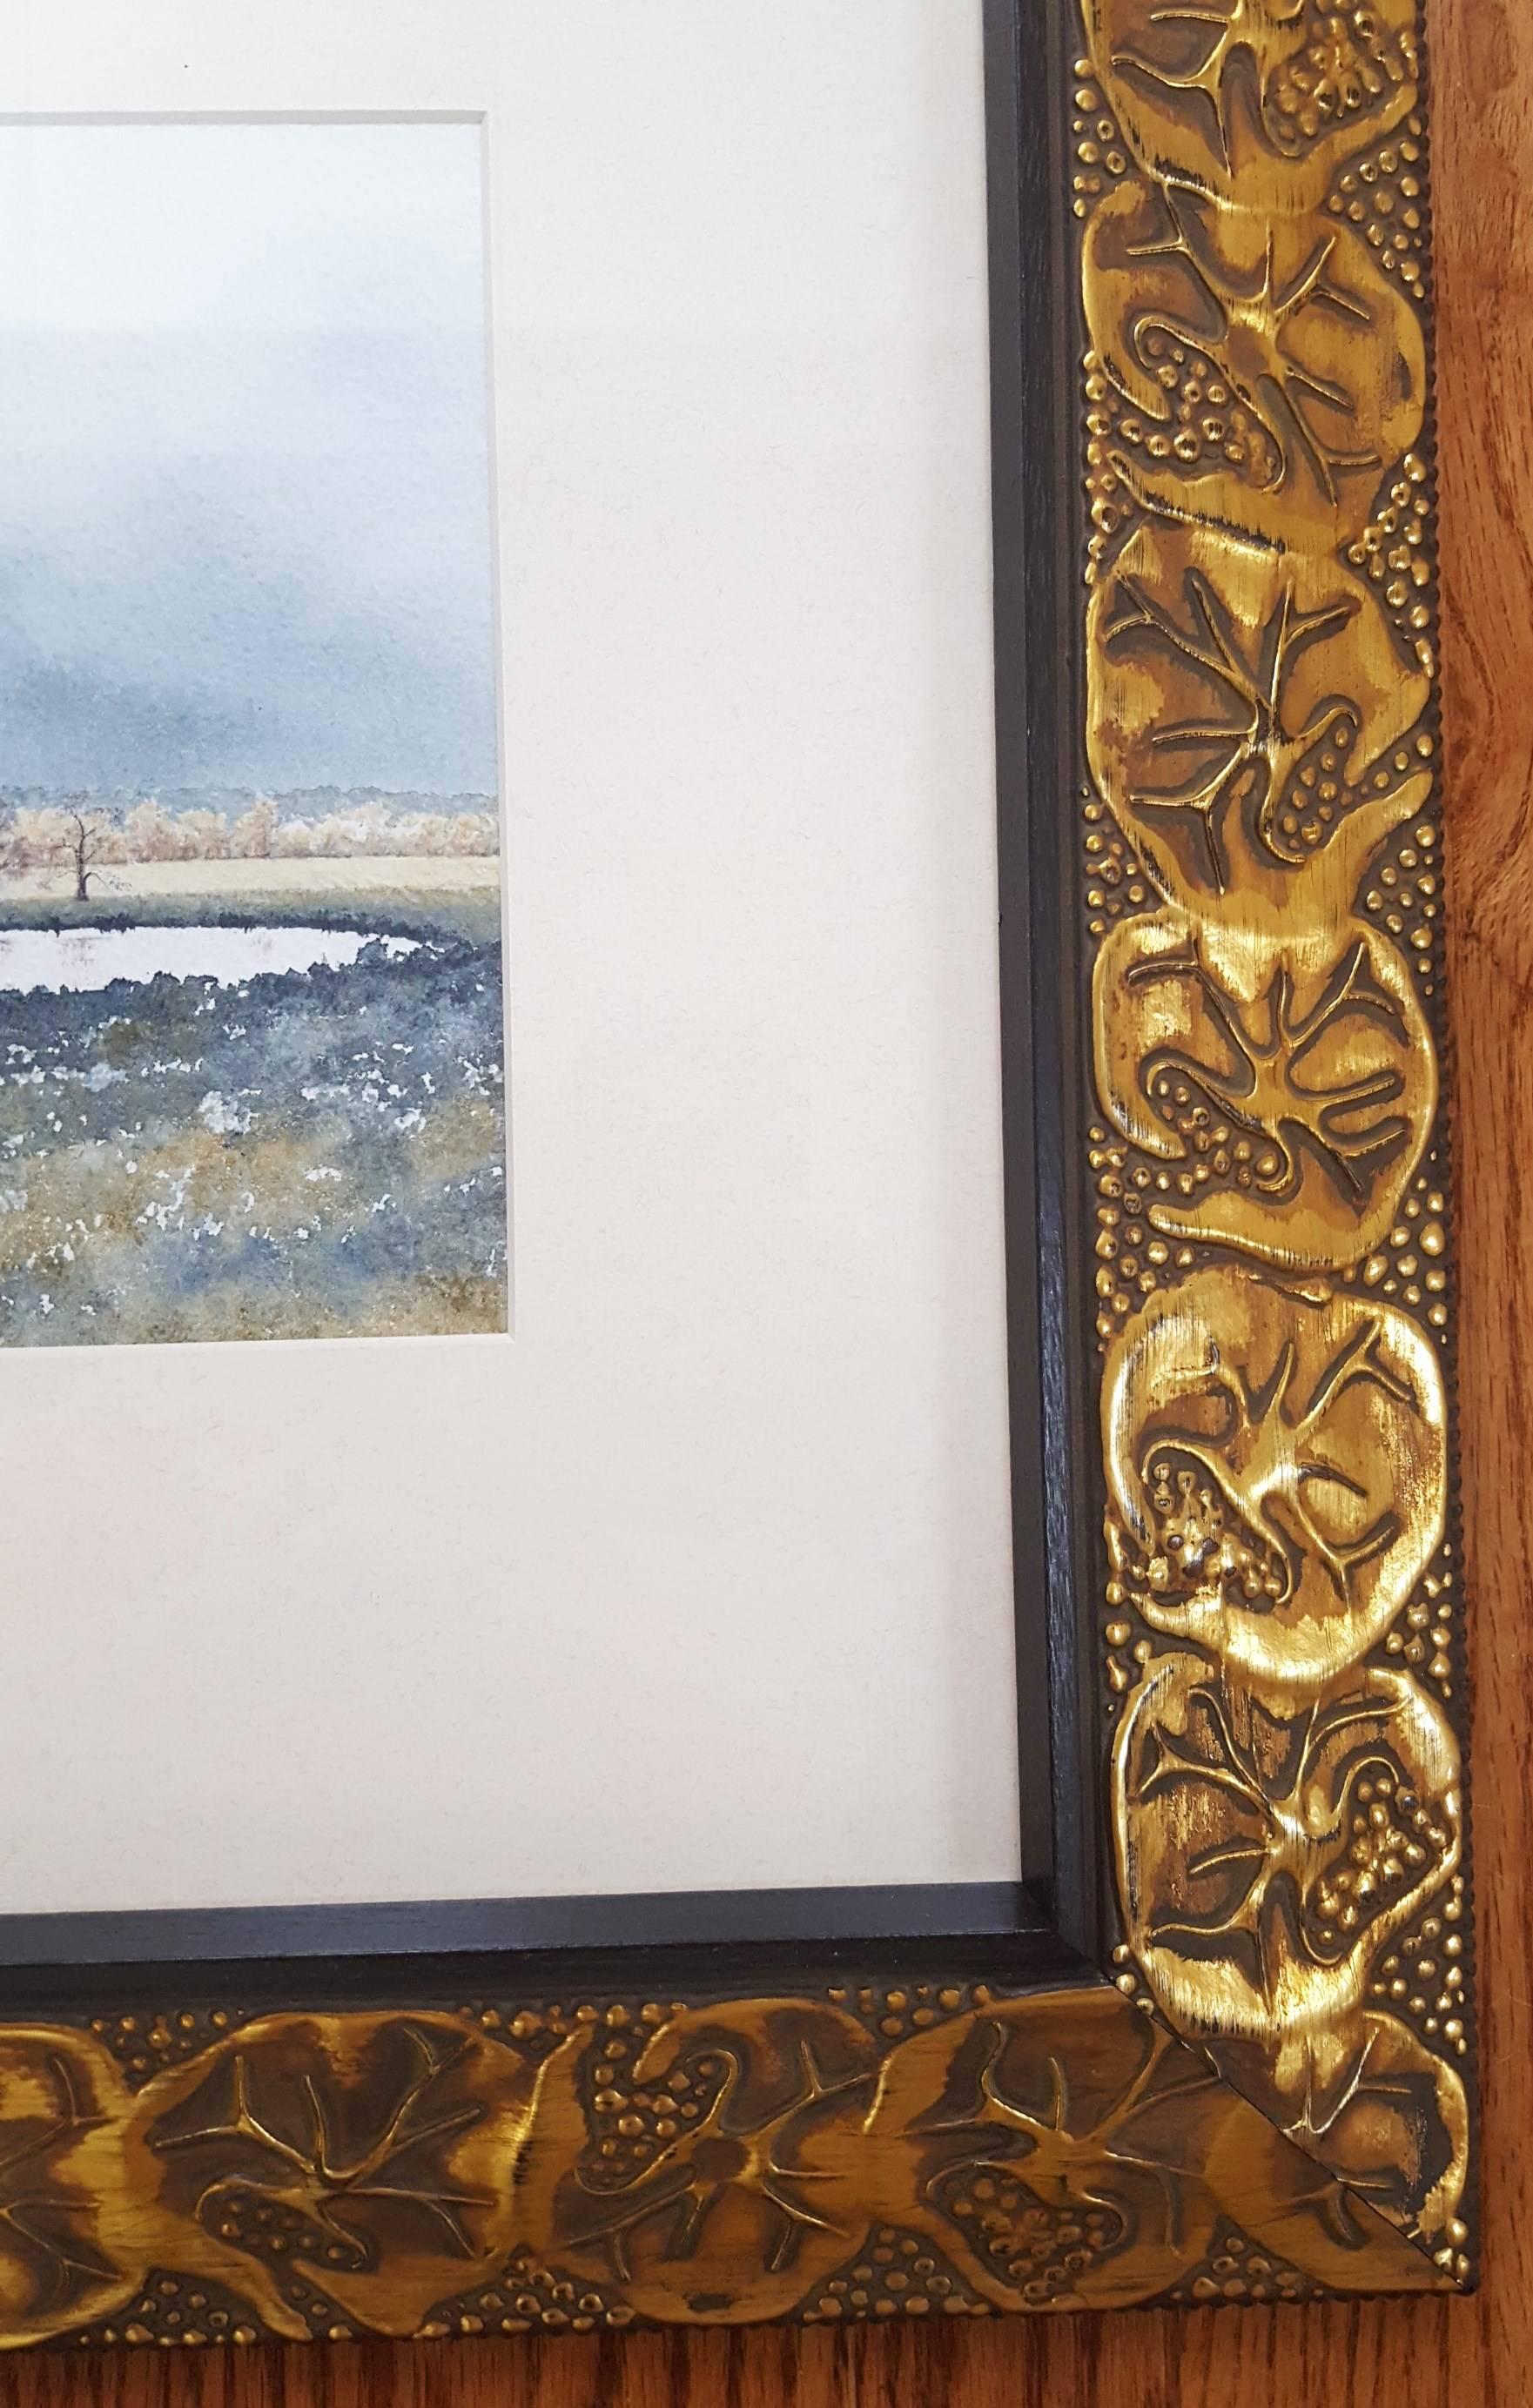 An original signed watercolor by English artist Gillie Cawthorne (1963-) titled 